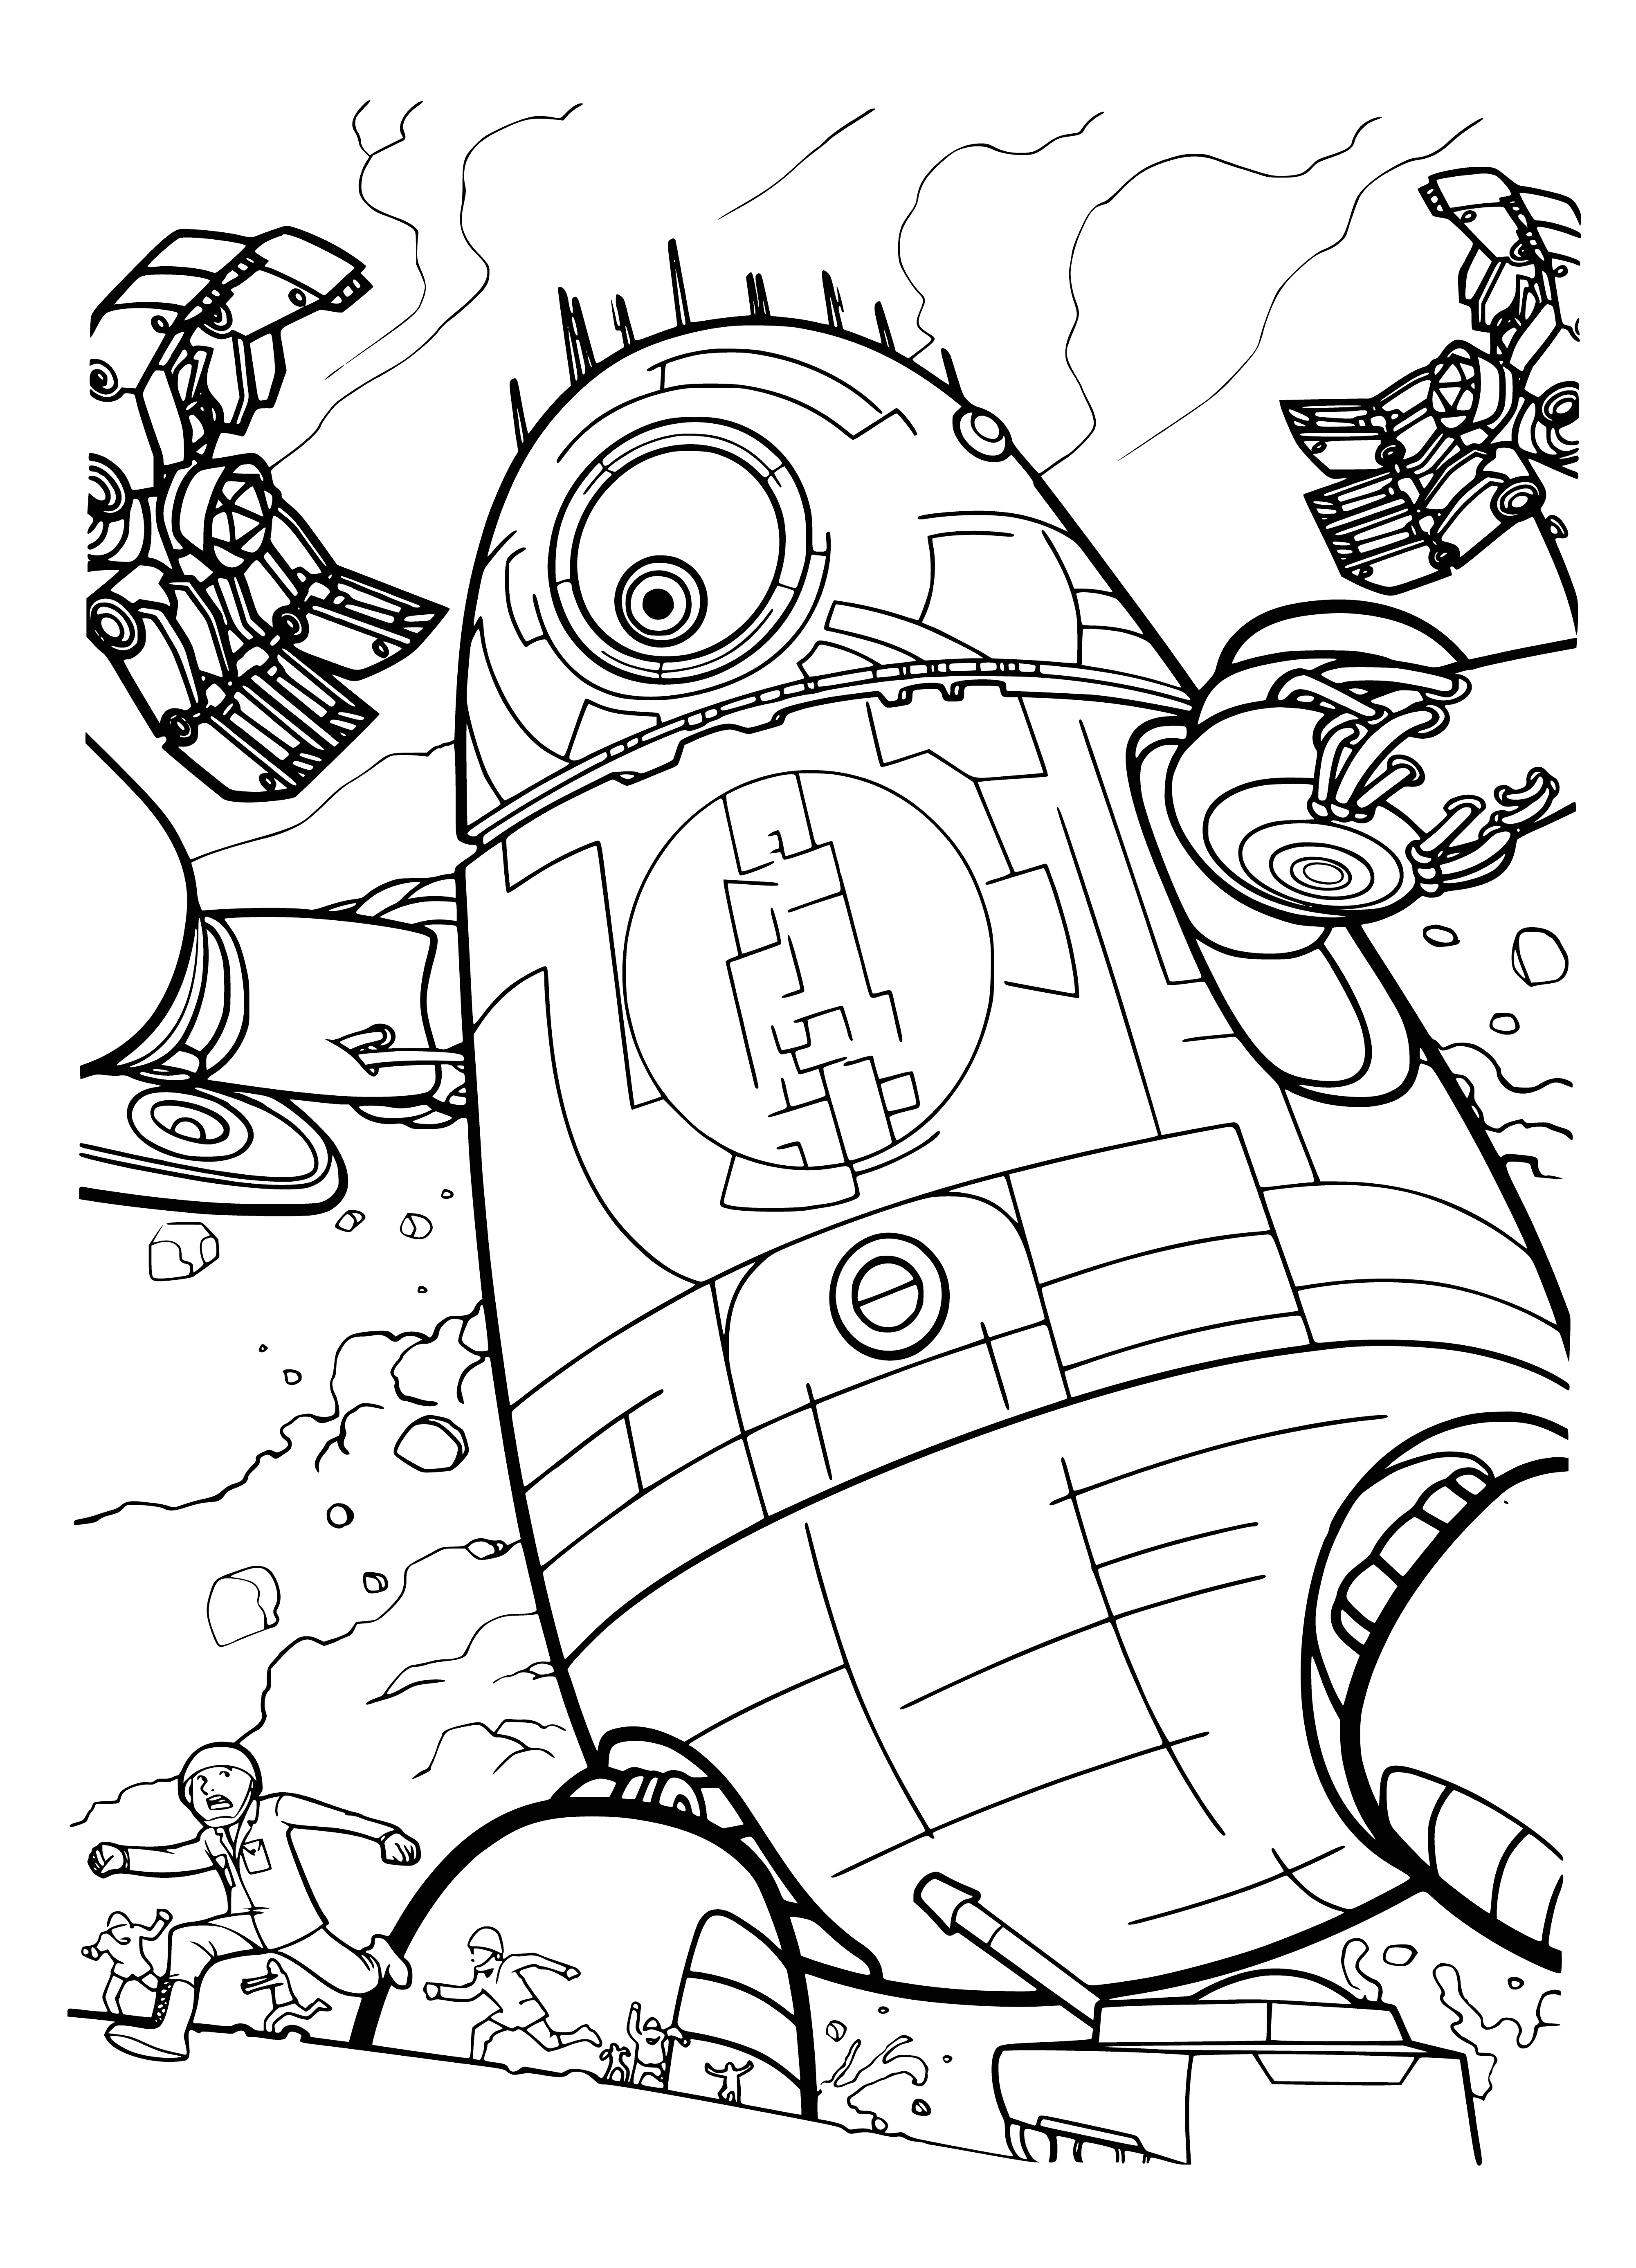 coloring page: Robot towers over cowering monsters, eyes glowing menacing red. Dark background, sense of foreboding.